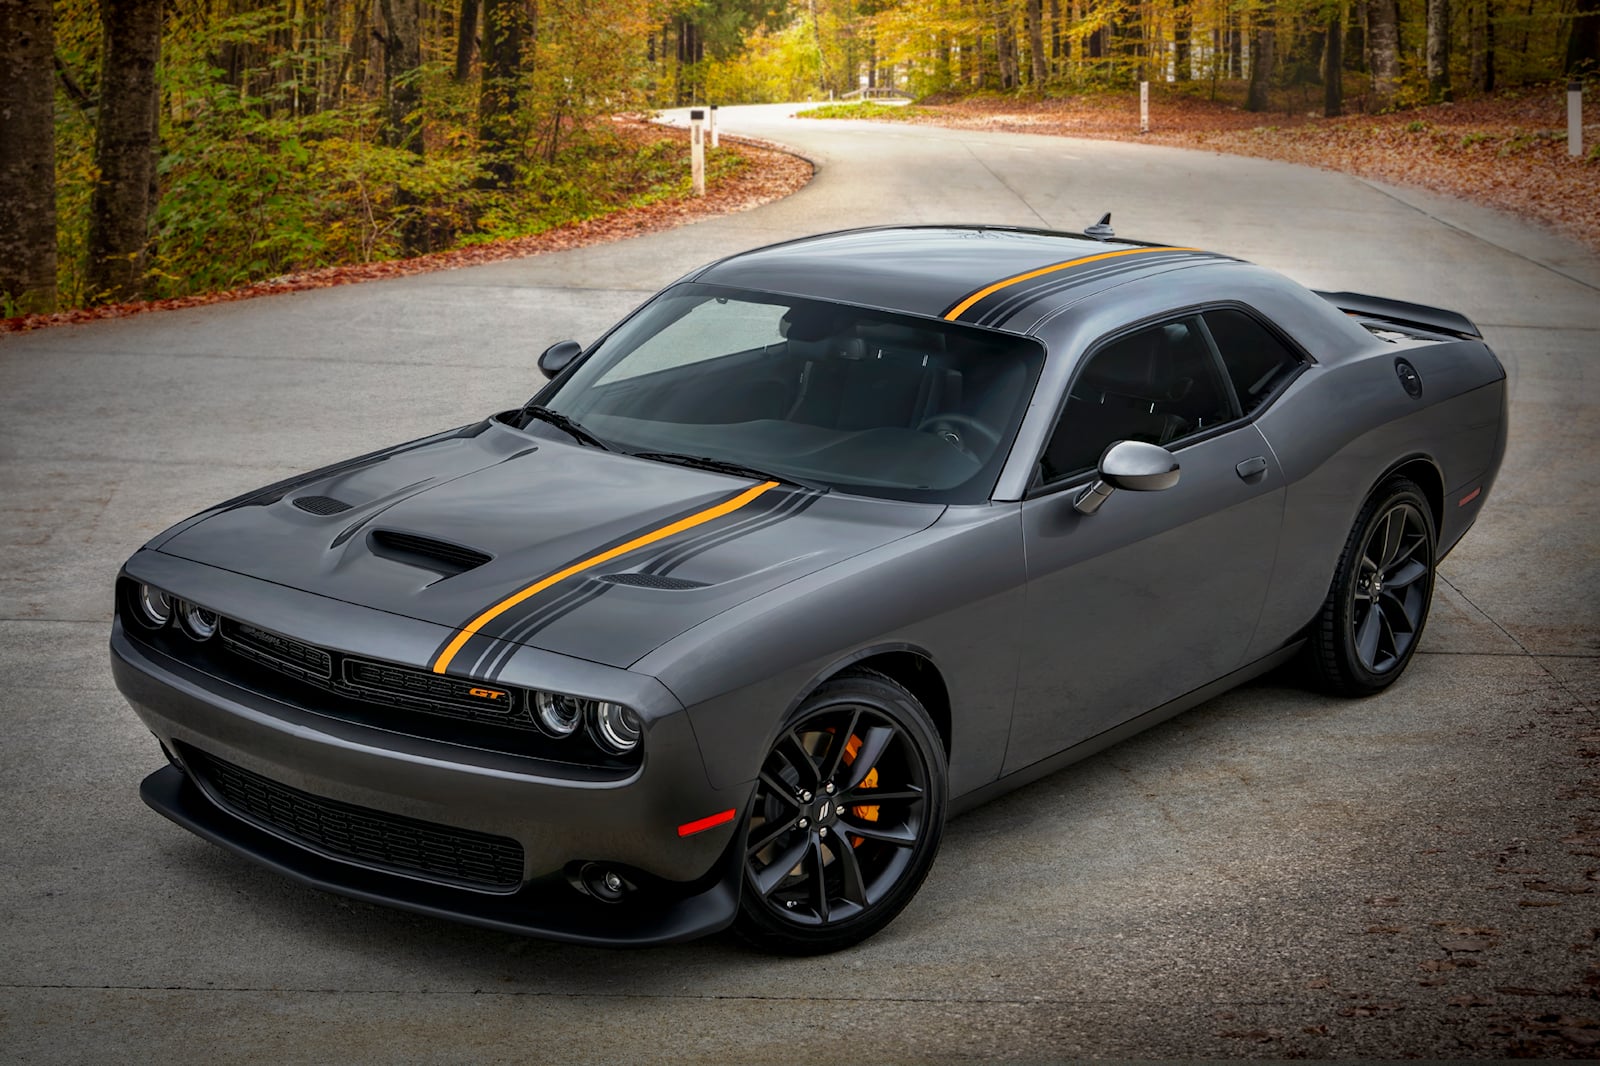 The brand recently debuted the Dodge Charger Daytona SRT EV Concept, showca...